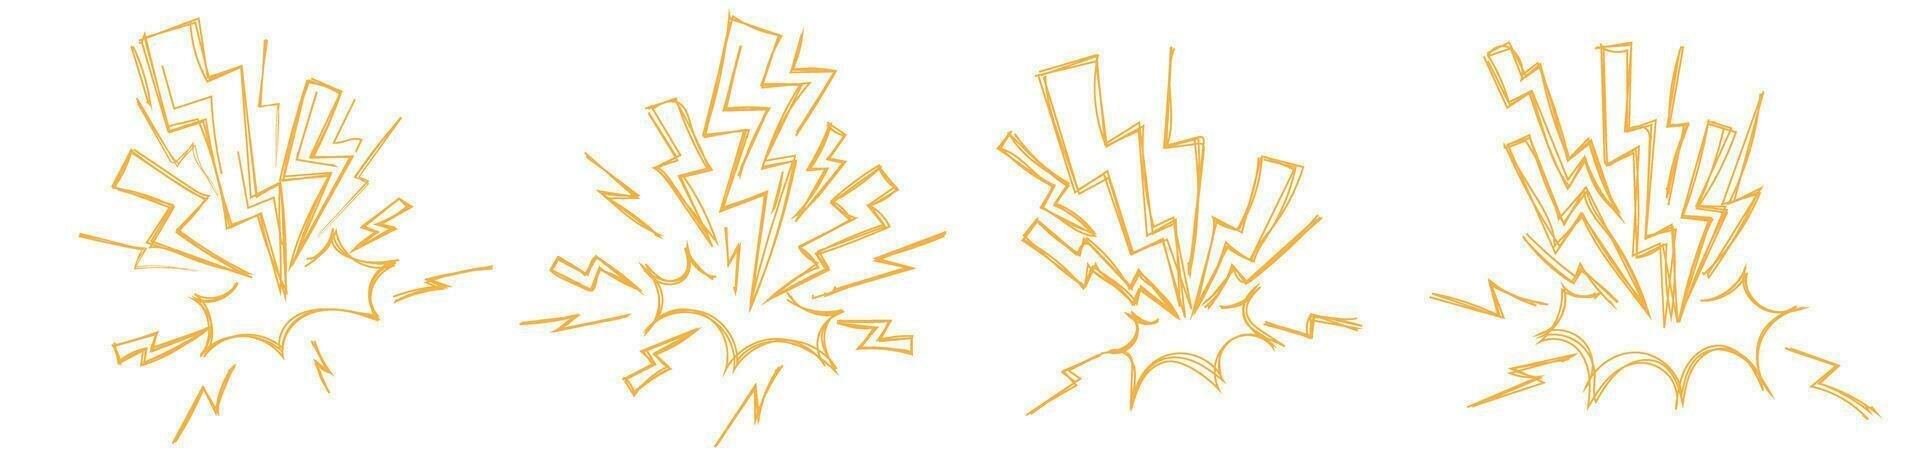 doodle thunder strike pencil scribble drawing hand drawing sketch grunge style vector